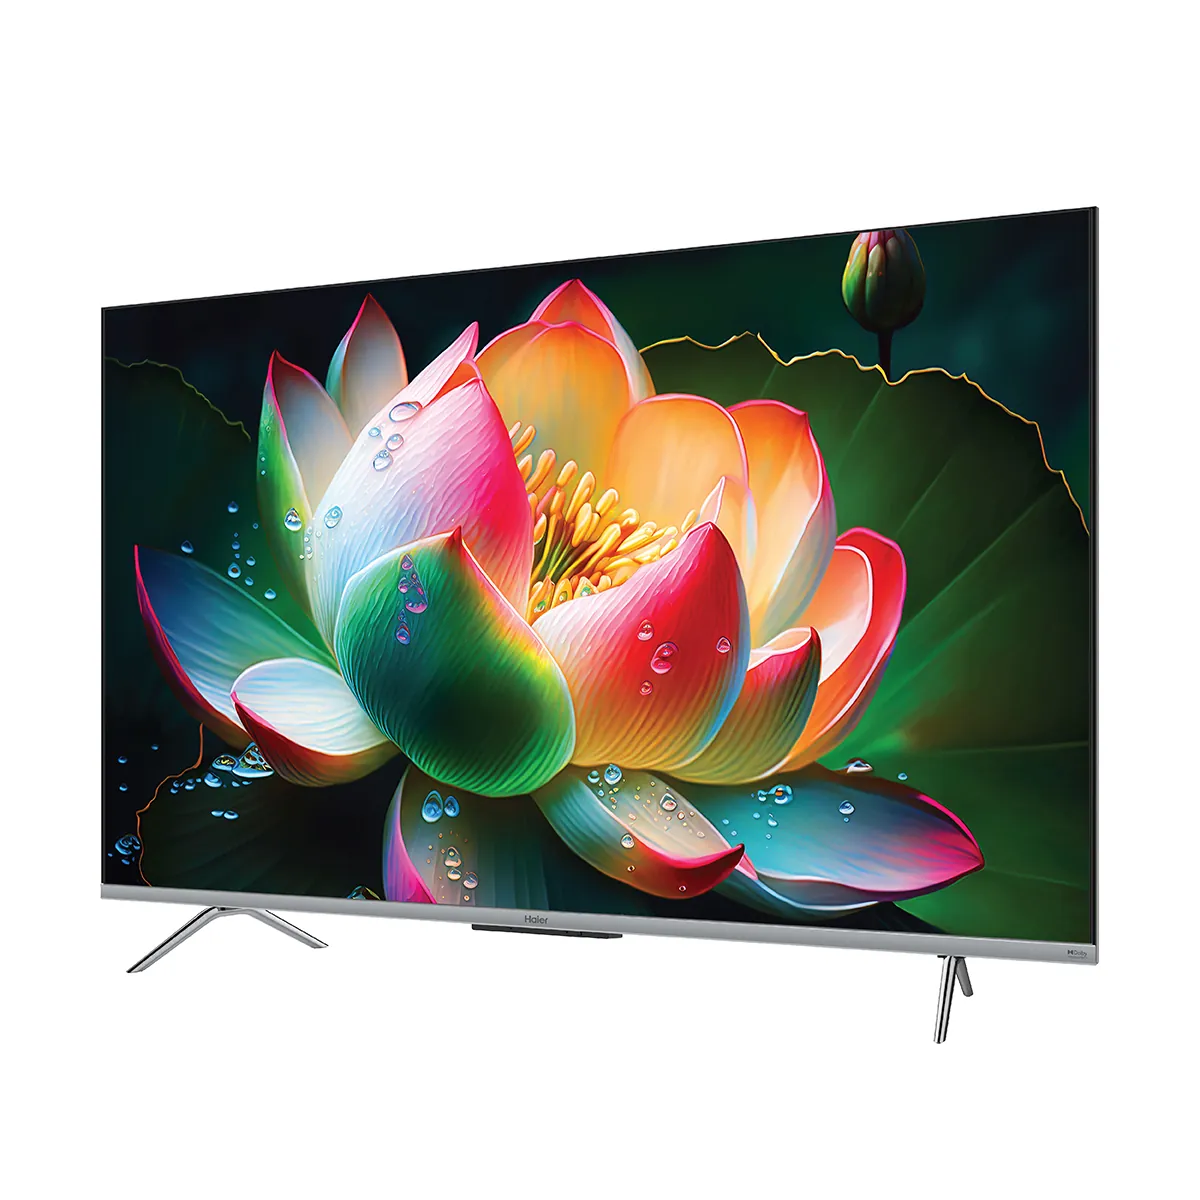 Haier S800QT QLED TVs launched in India: Big Screen Powerhouse for Entertainment & Gaming at an affordable price - News - News